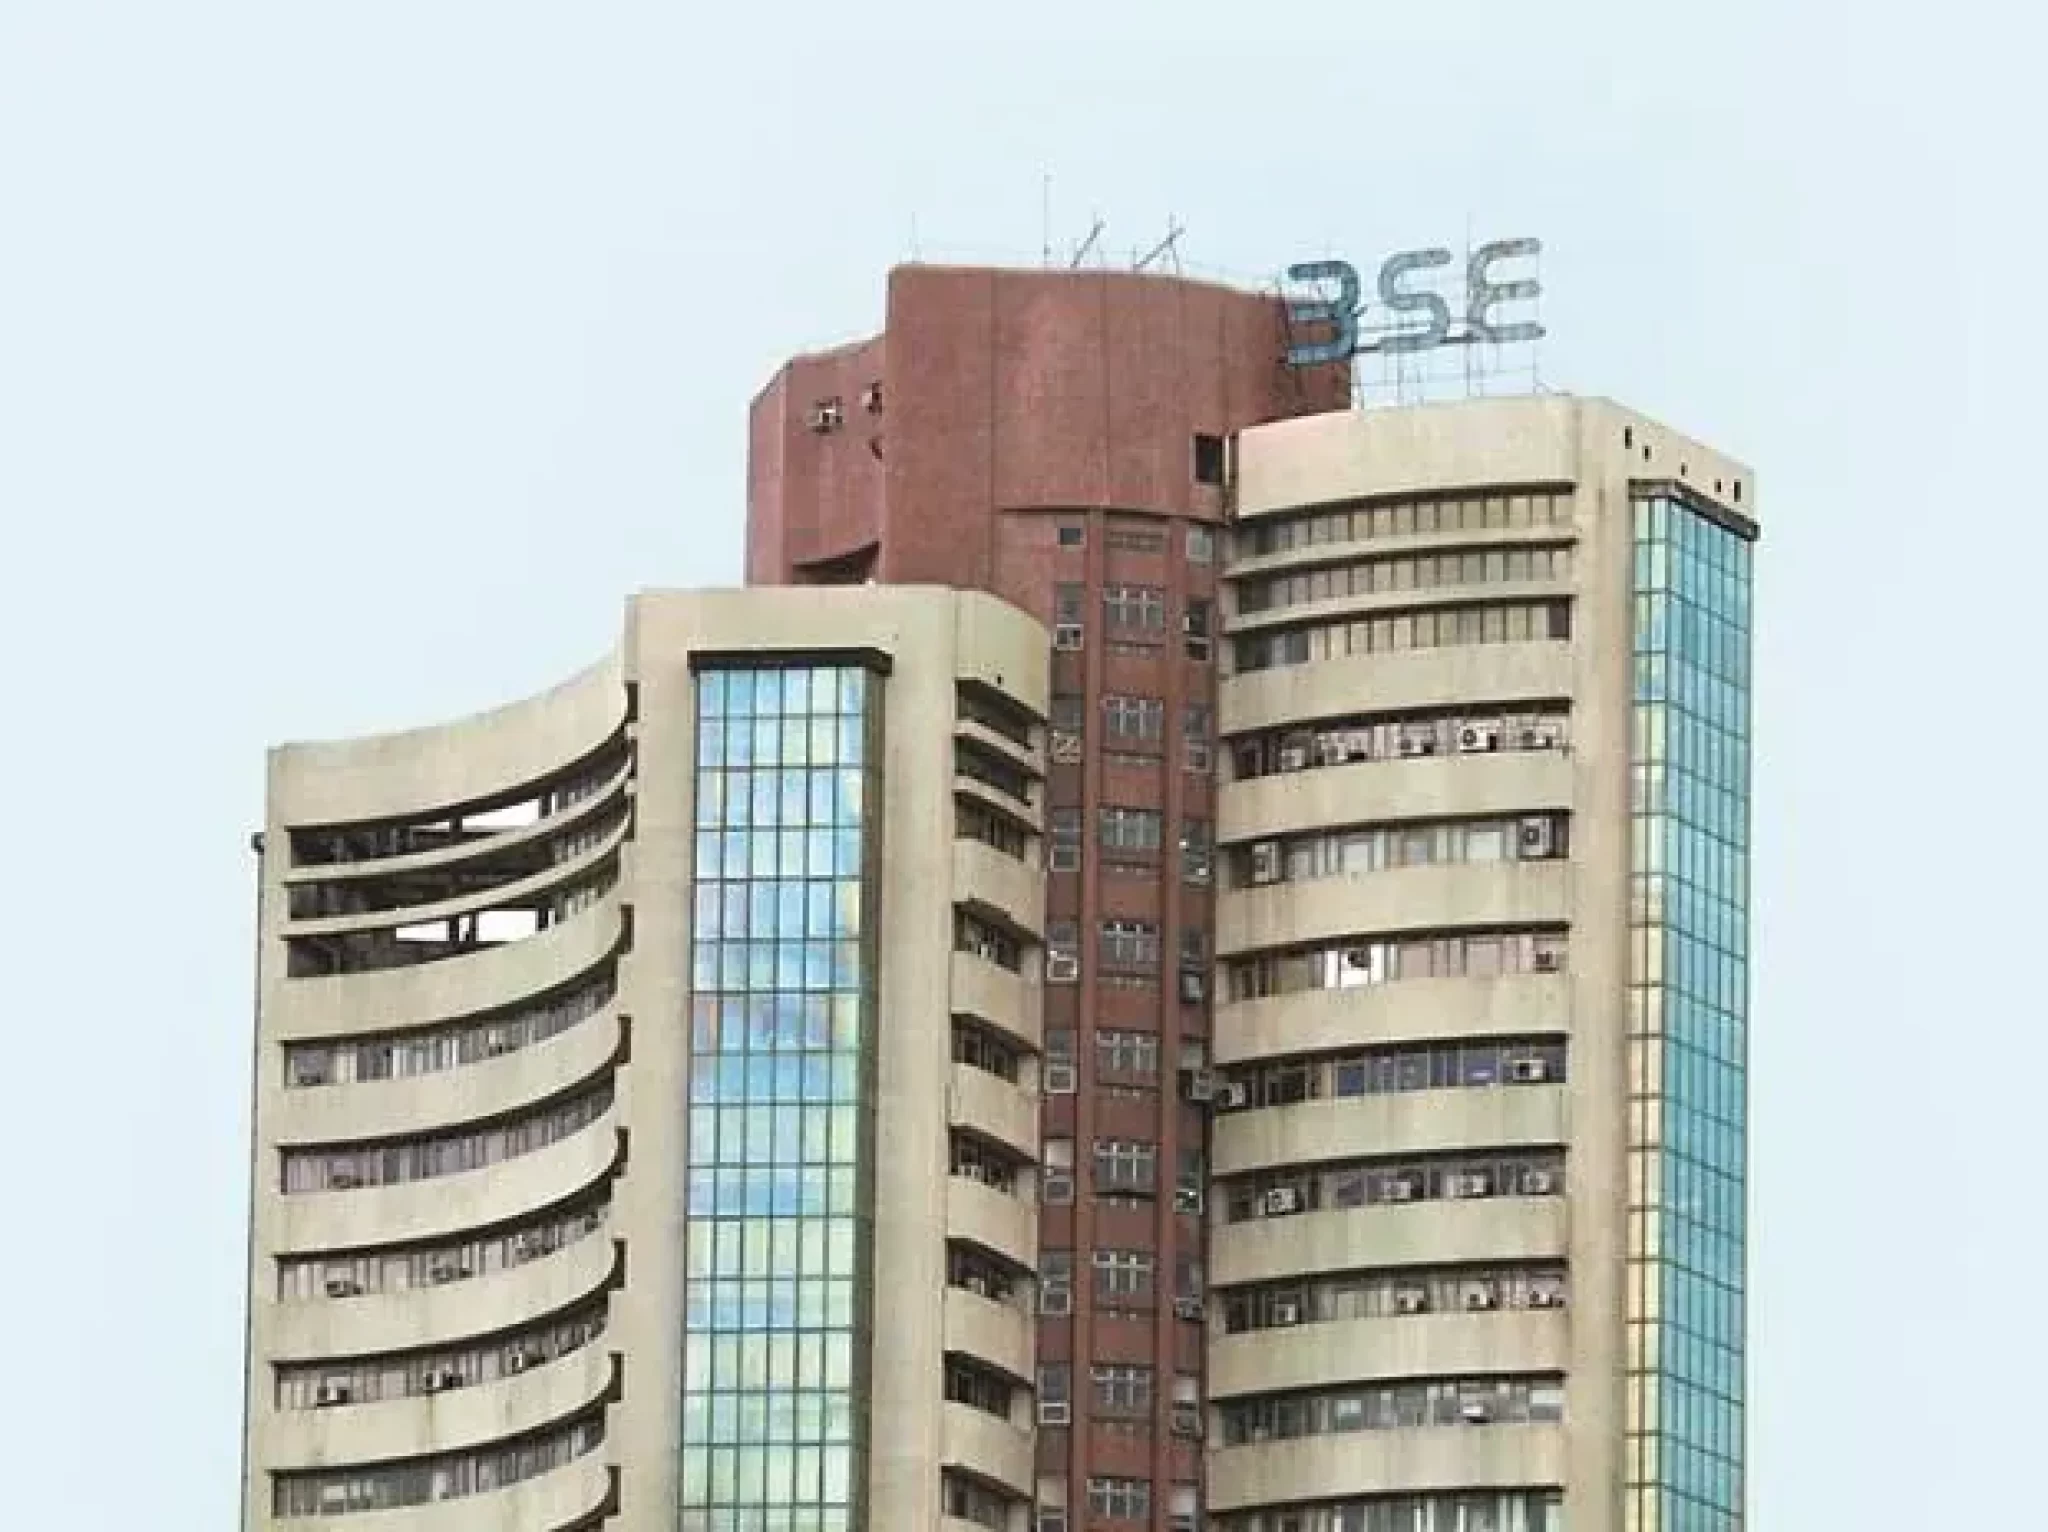 Sensex falls 1,000 pts on mounting inflation worries; Nifty ends at 16,202